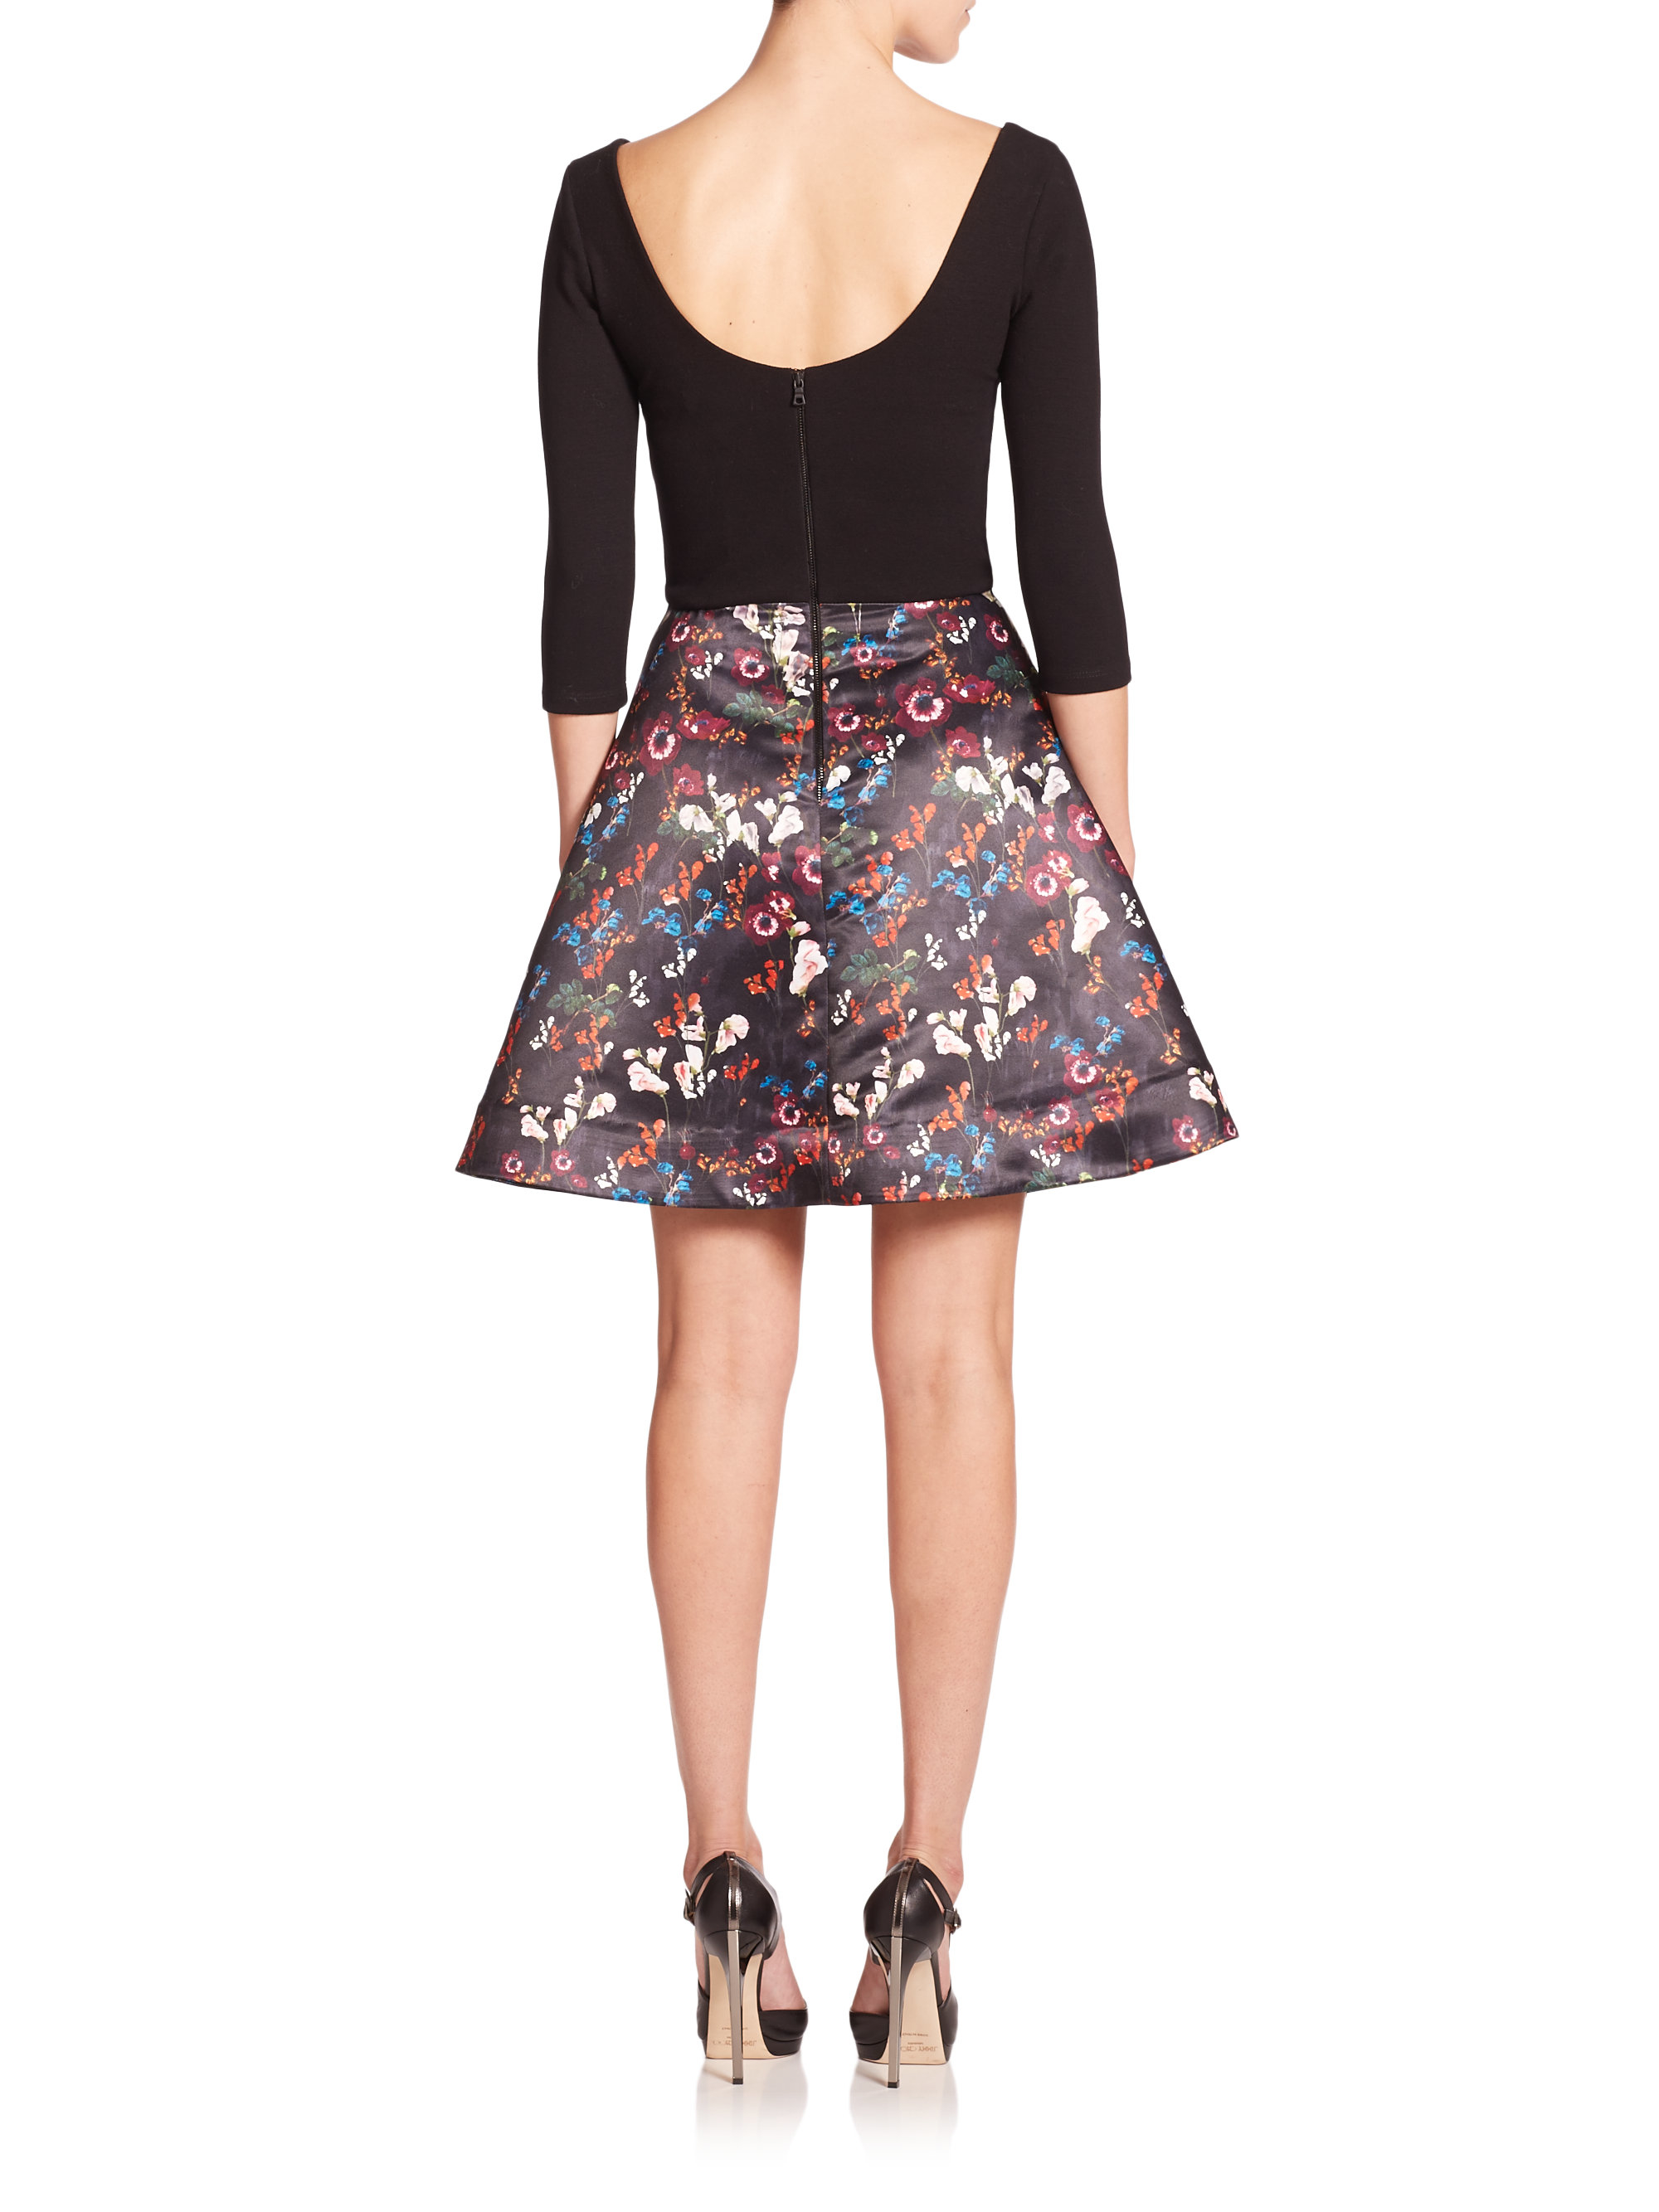 Alice + olivia Amie Knit-top Floral Dress in Black | Lyst